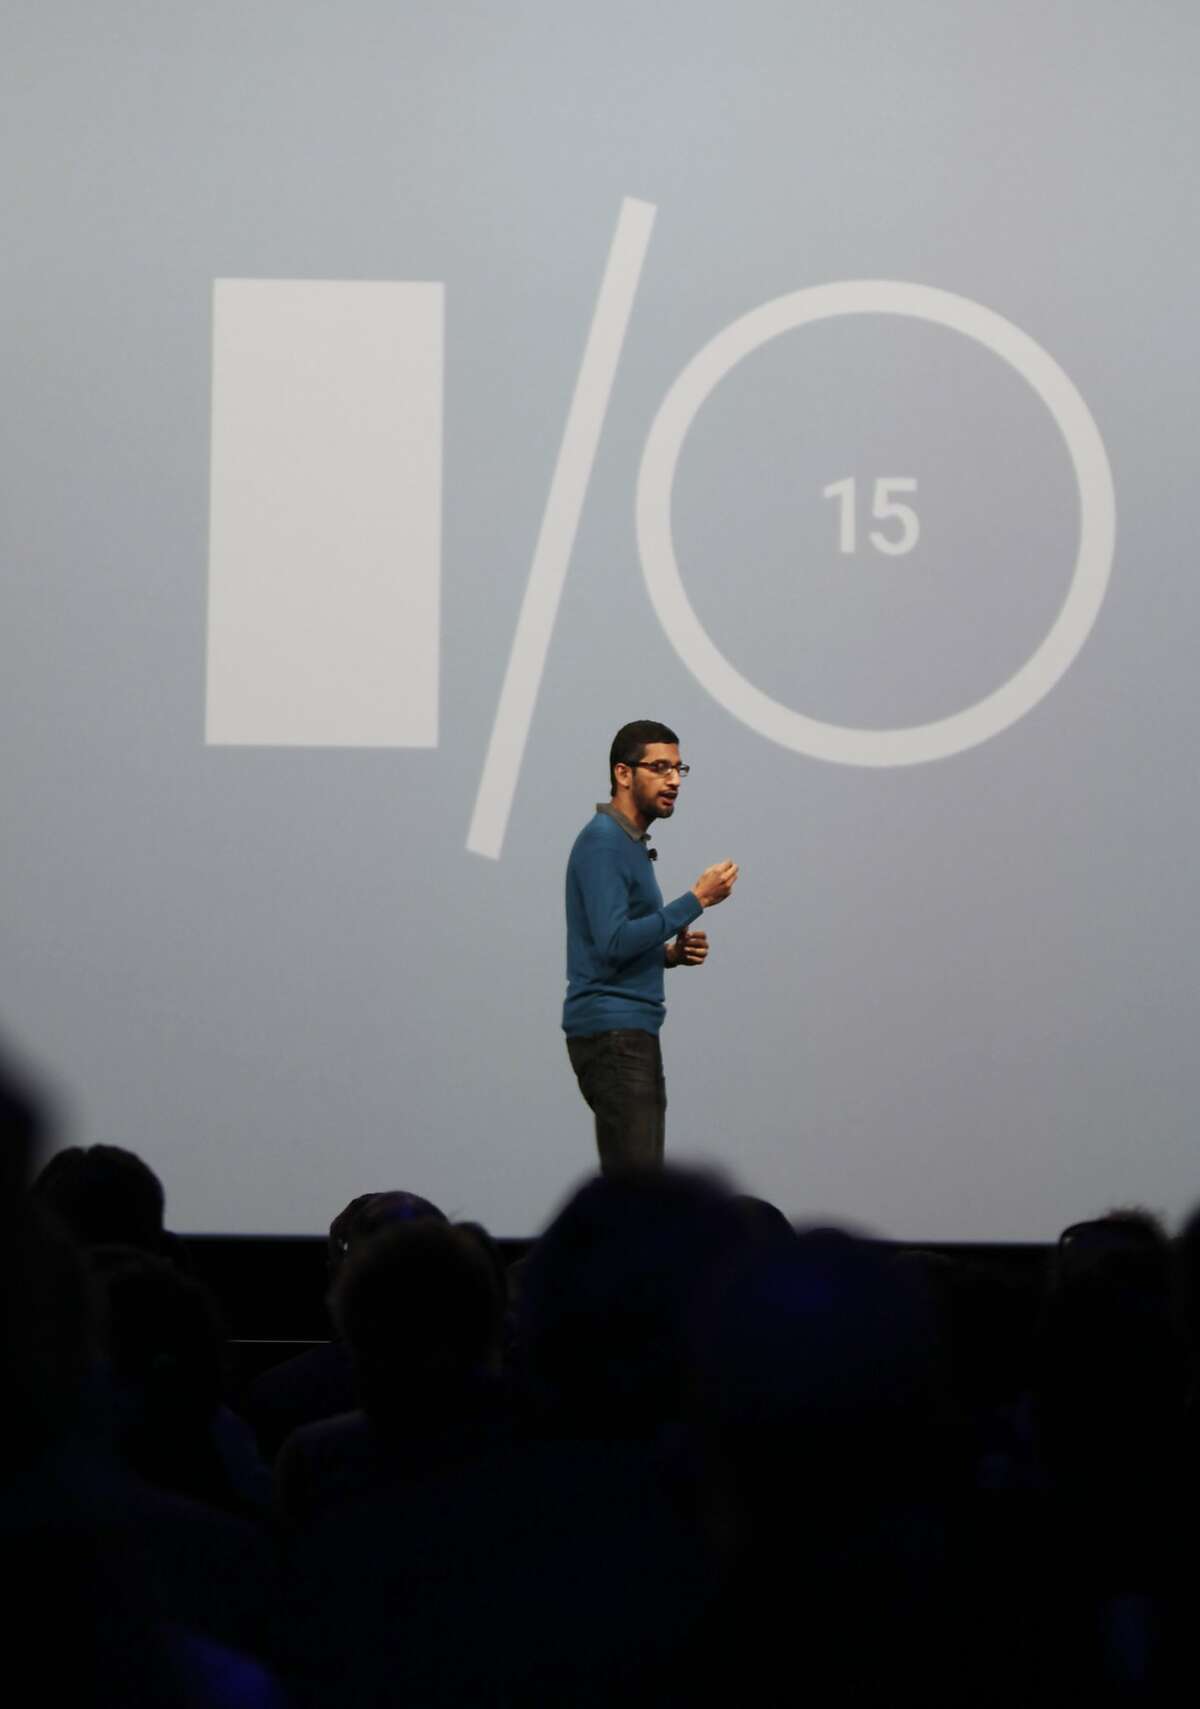 Senior Vice-President of Products, Sundar Pichai speaks to attendees during the Google I/O 2015 keynote at Moscone West on Thursday, May 28, 2015 in San Francisco, Calif.